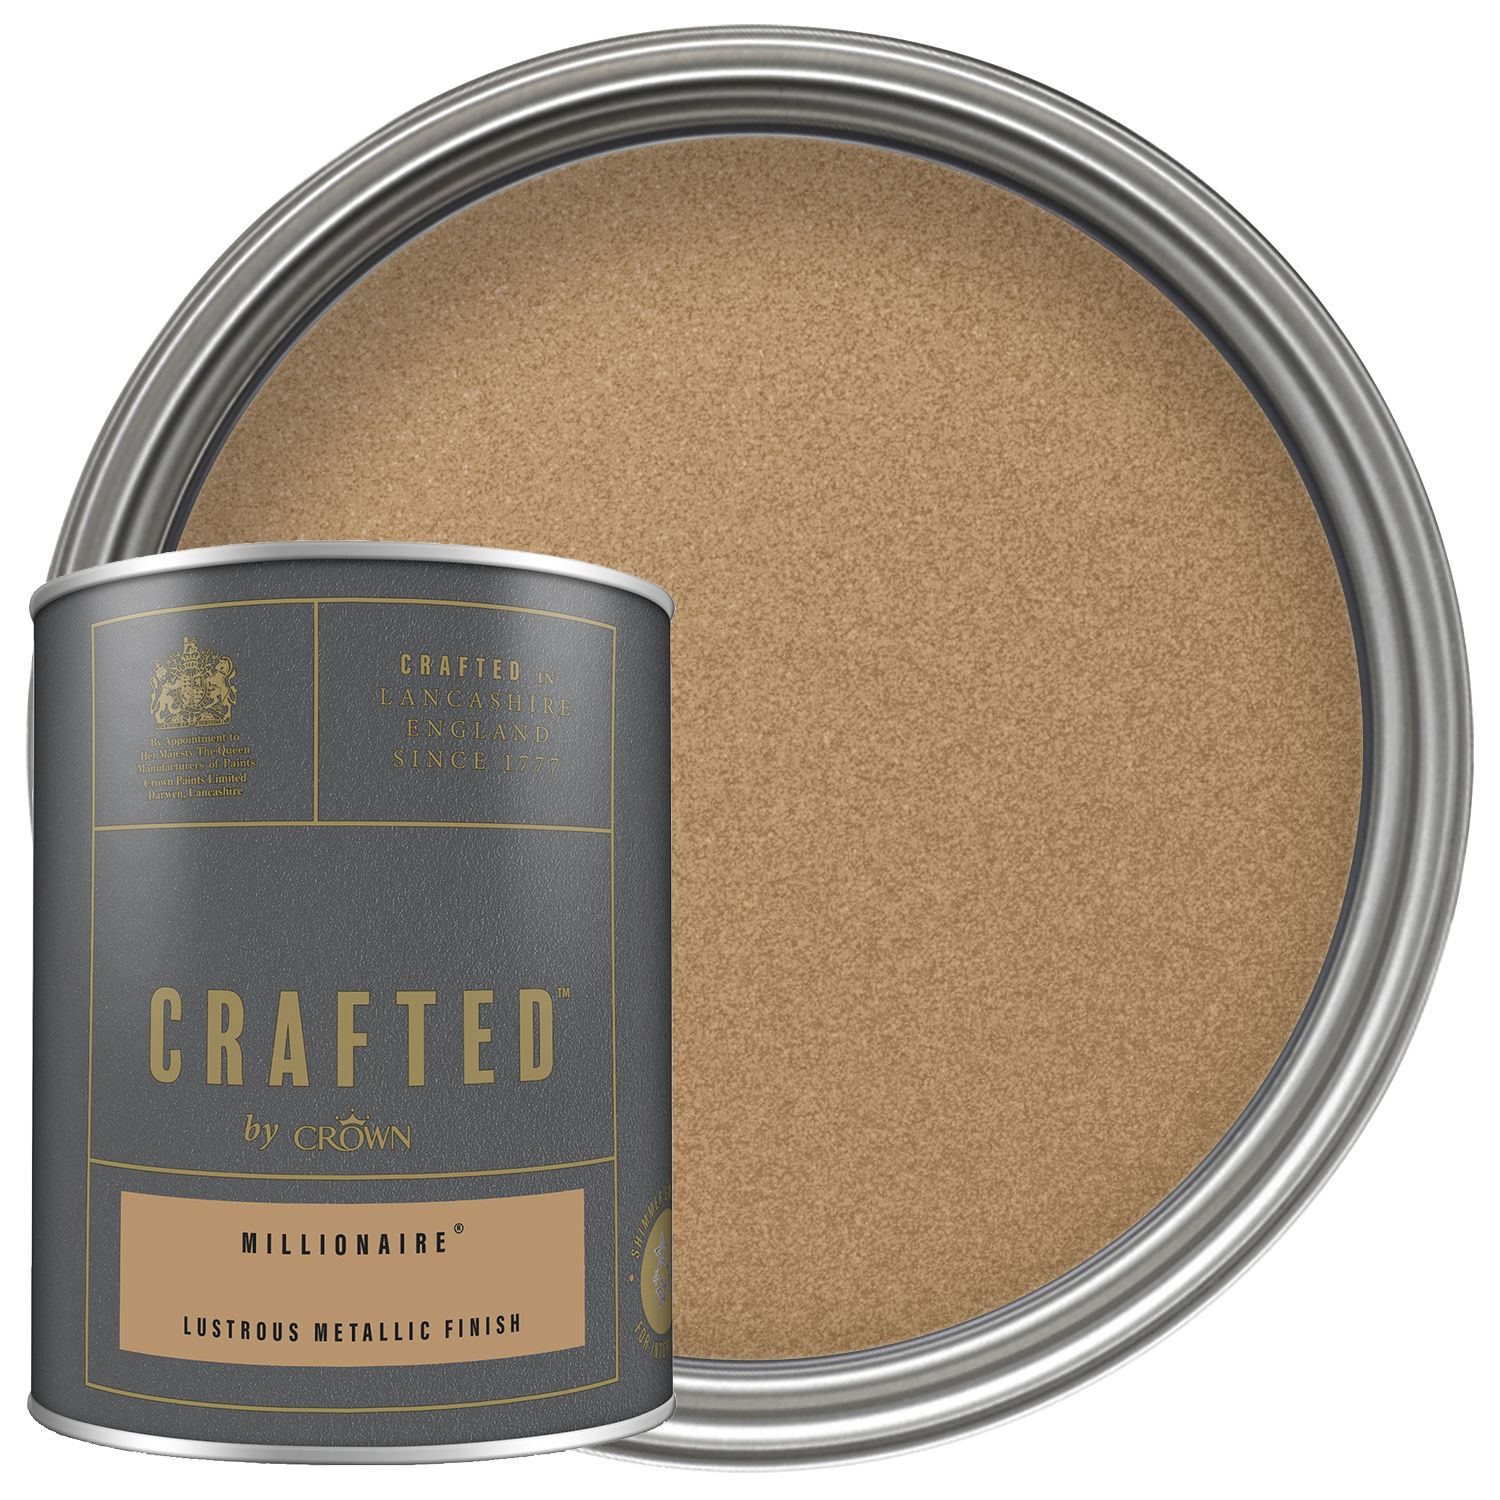 CRAFTED™ by Crown Emulsion Interior Paint - Metallic Millionaire - 1.25L